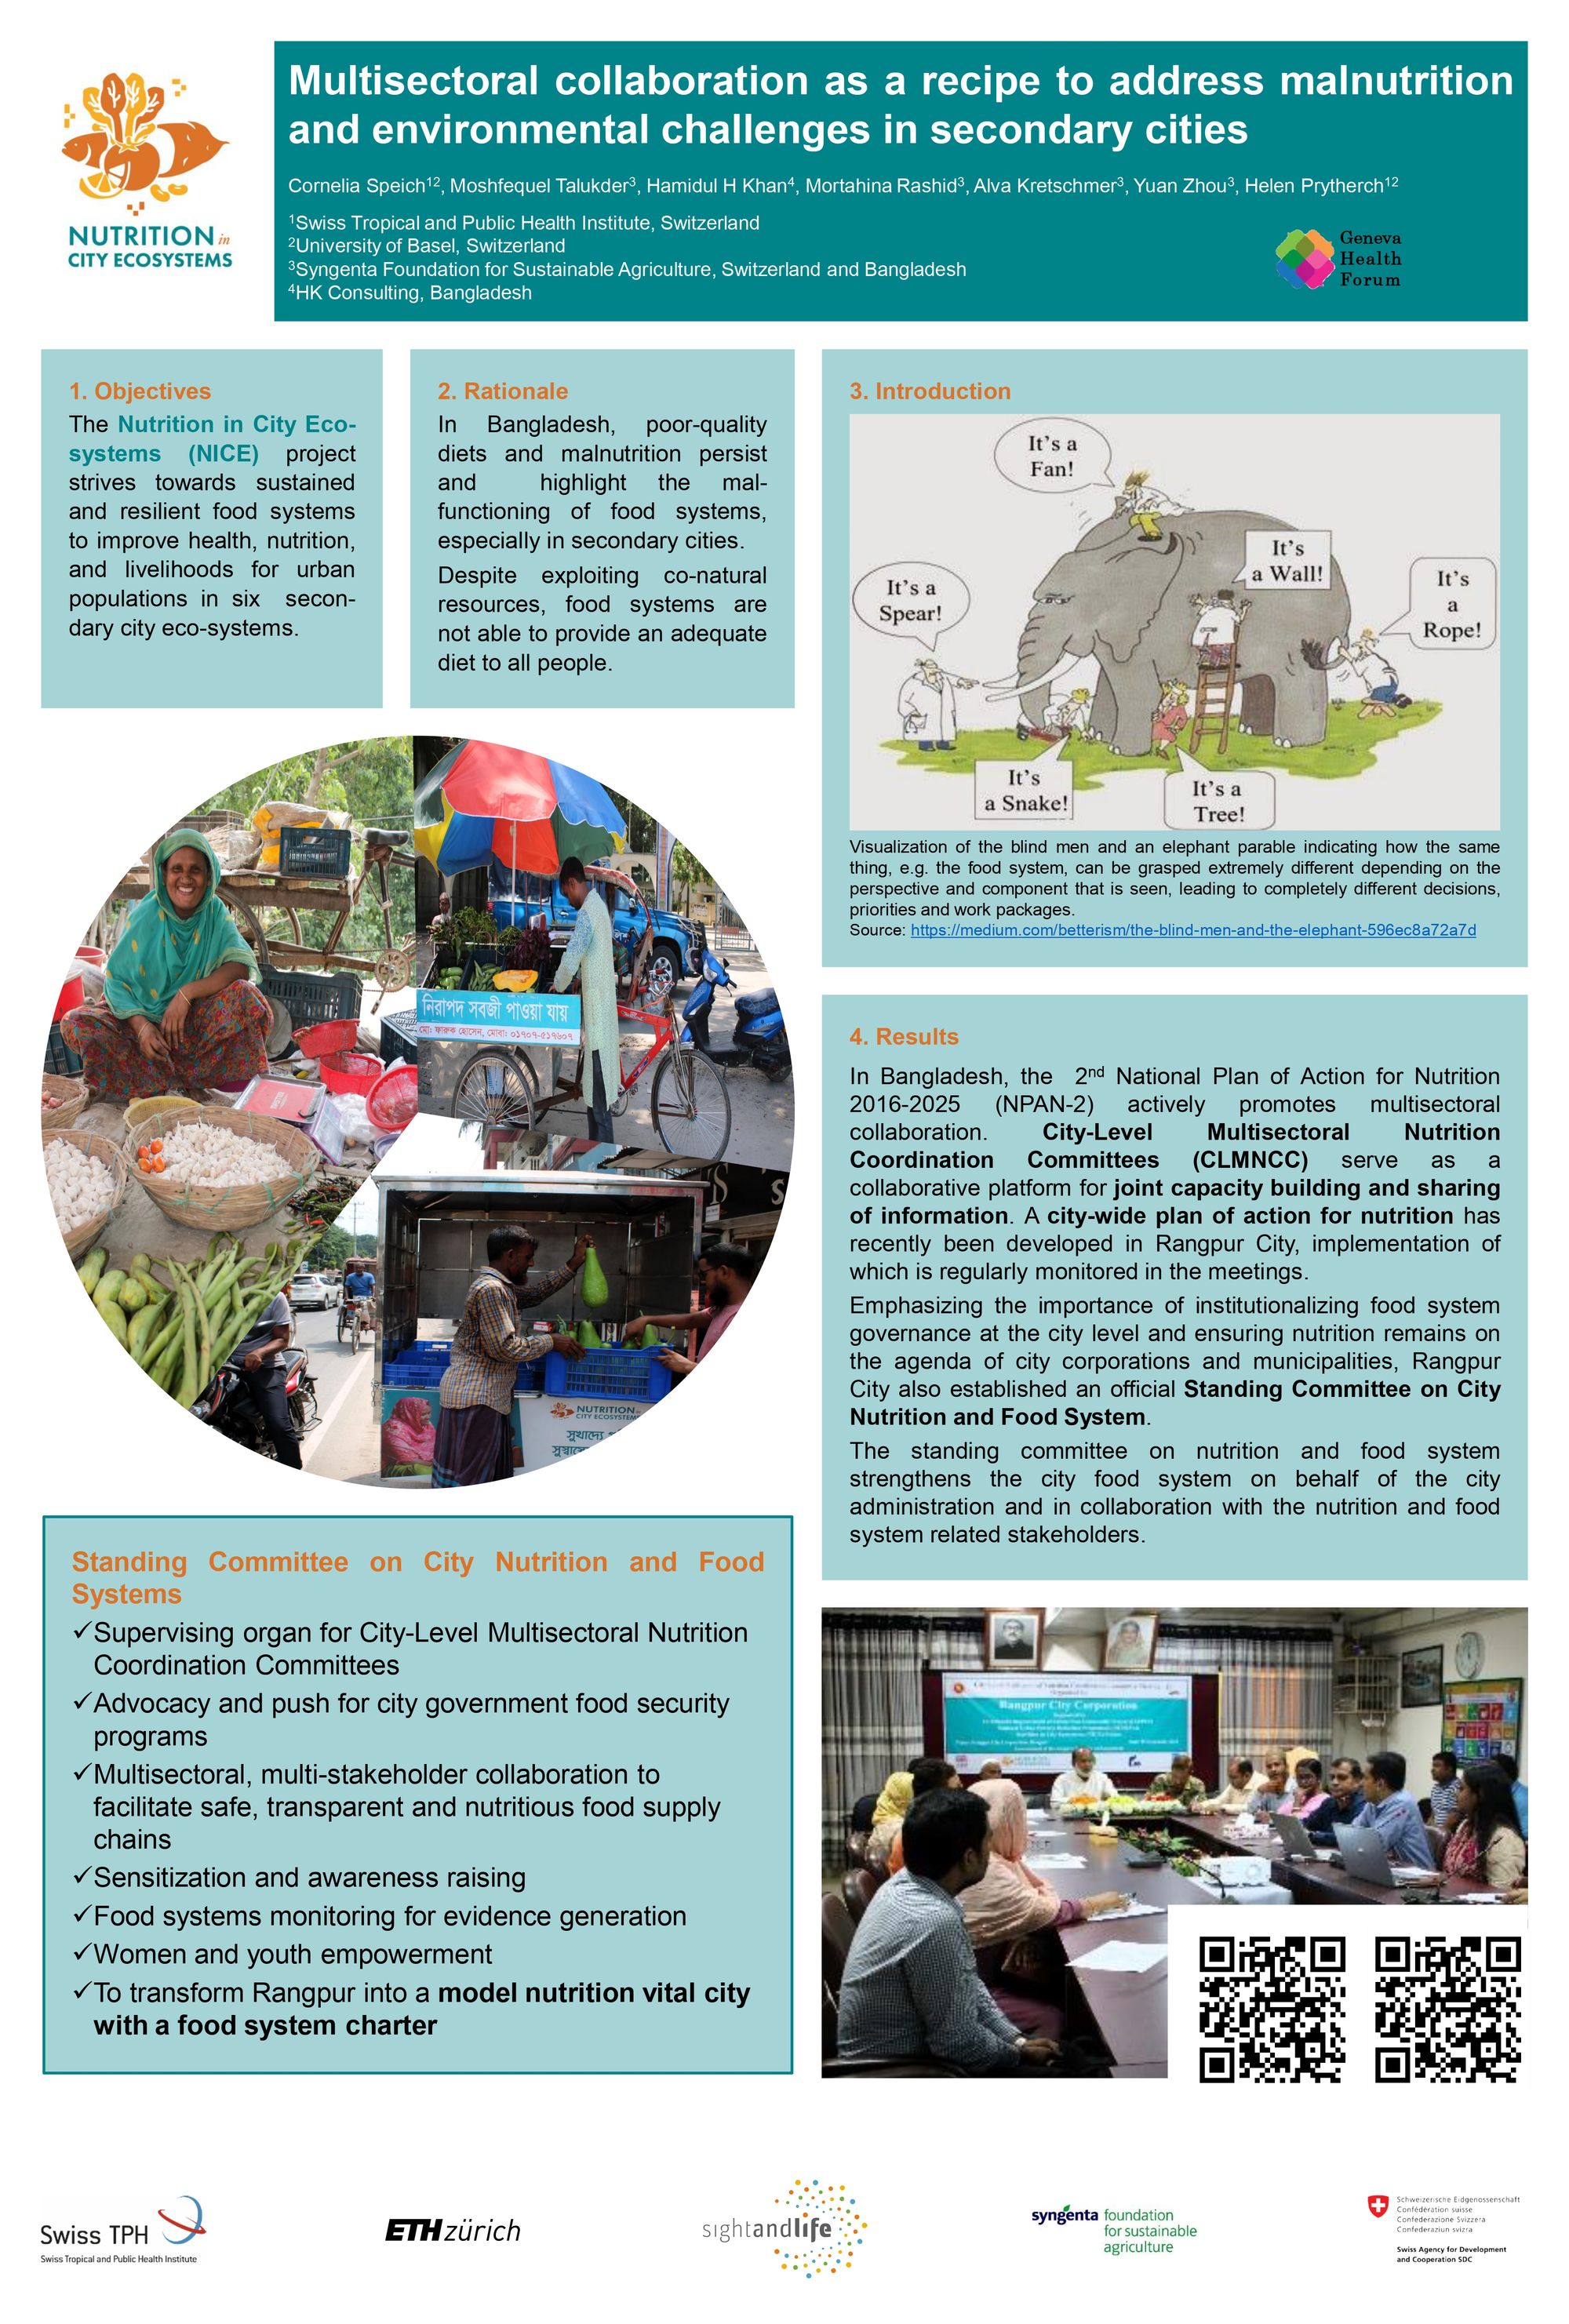 Multisectoral collaboration as a recipe to address malnutrition and environmental challenges in secondary cities through a food systems approach